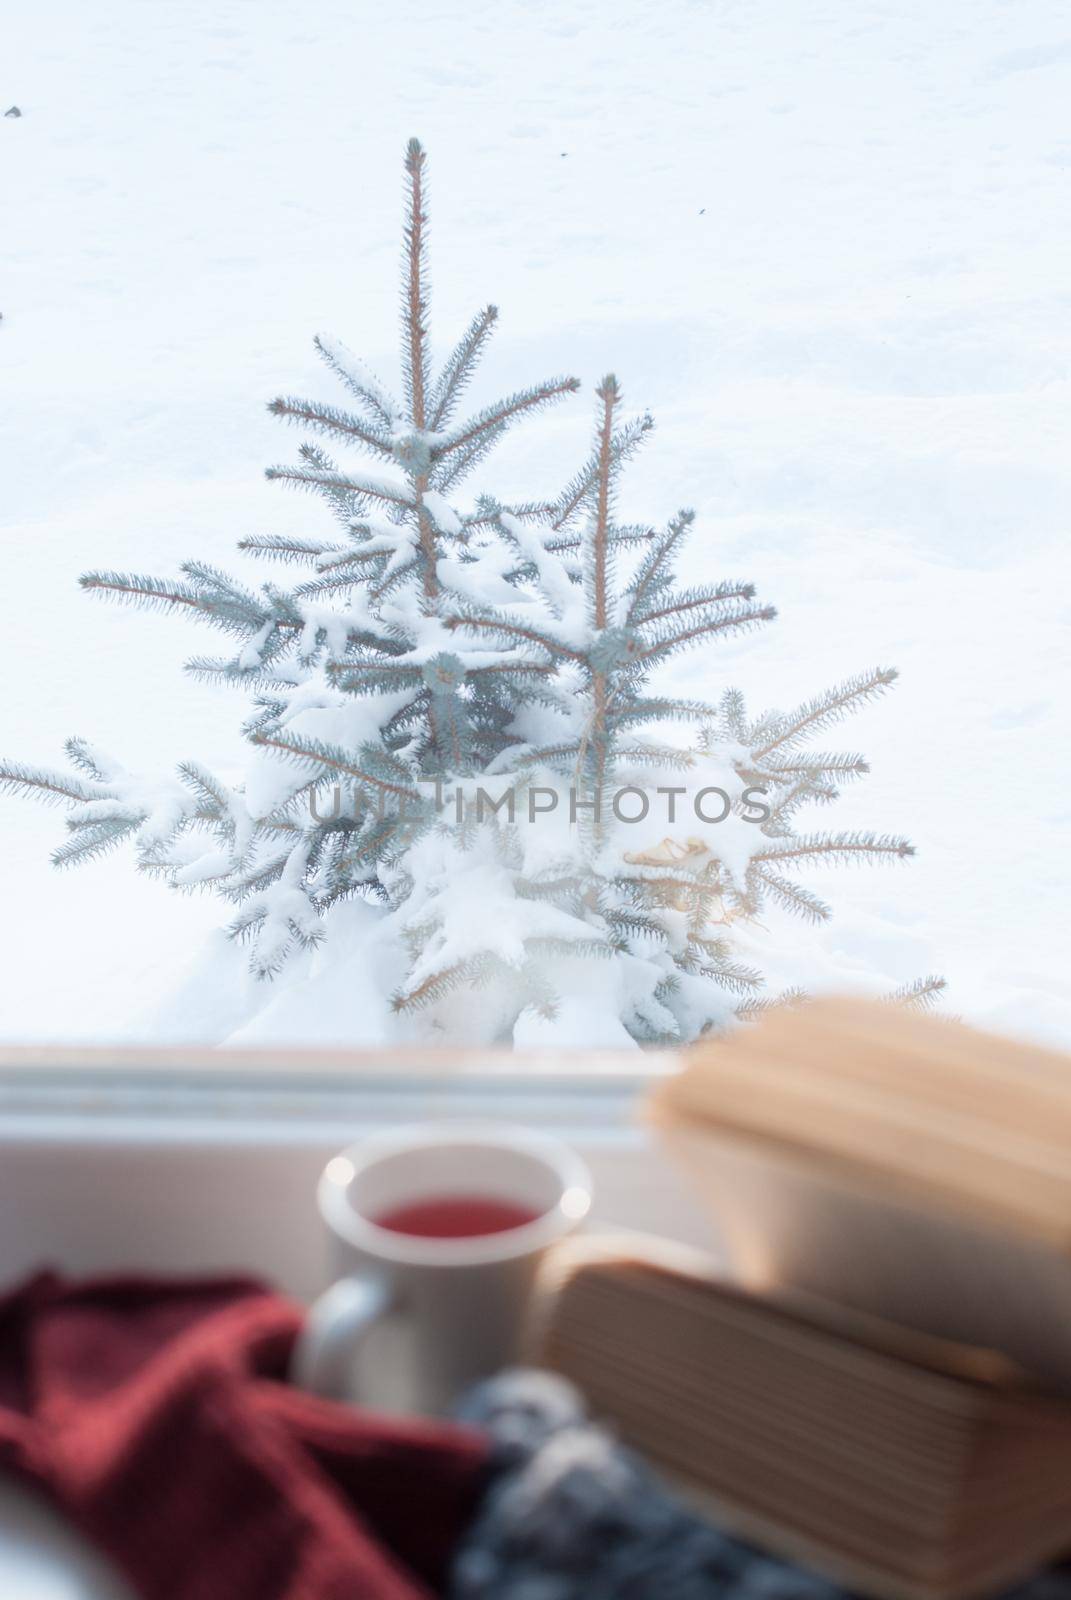 snow outside the window and open book indoor